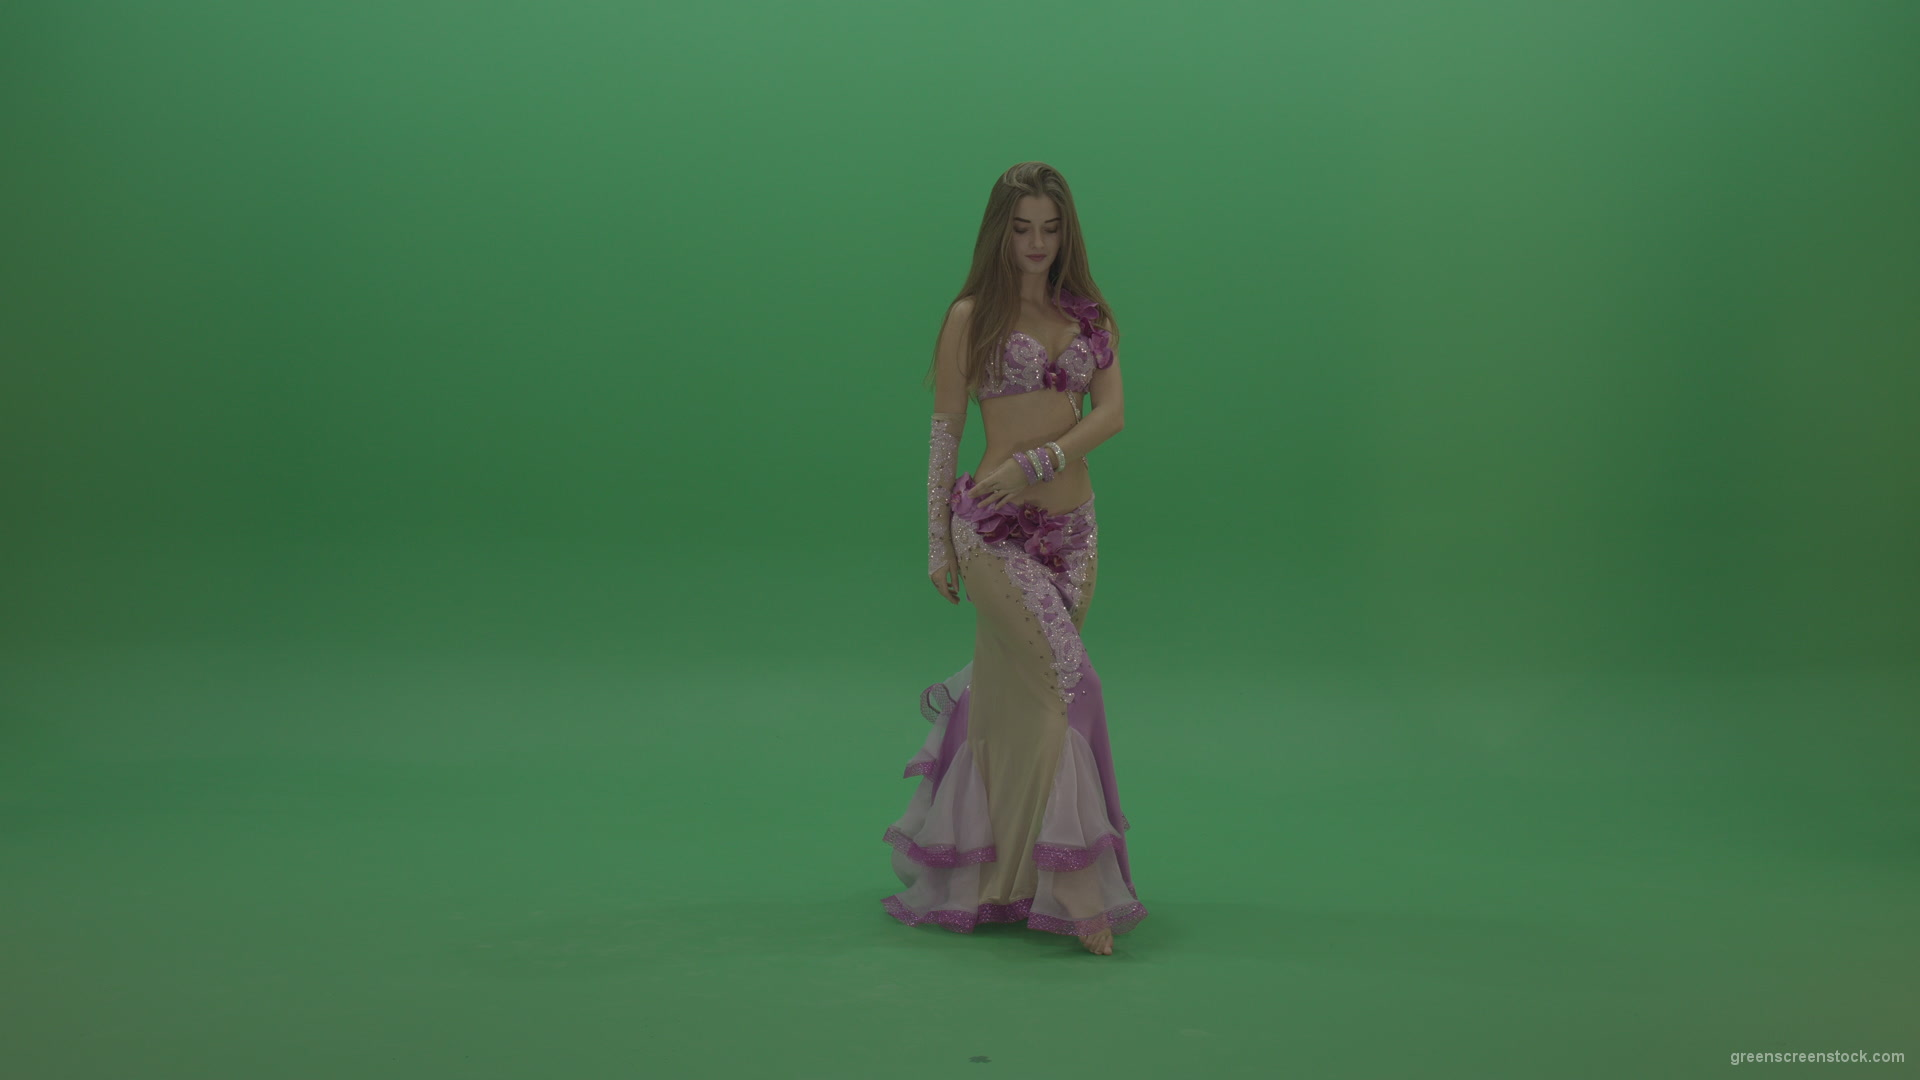 Beautiful-belly-dancer-display-amazing-dance-moves-over-chromakey-background_001 Green Screen Stock